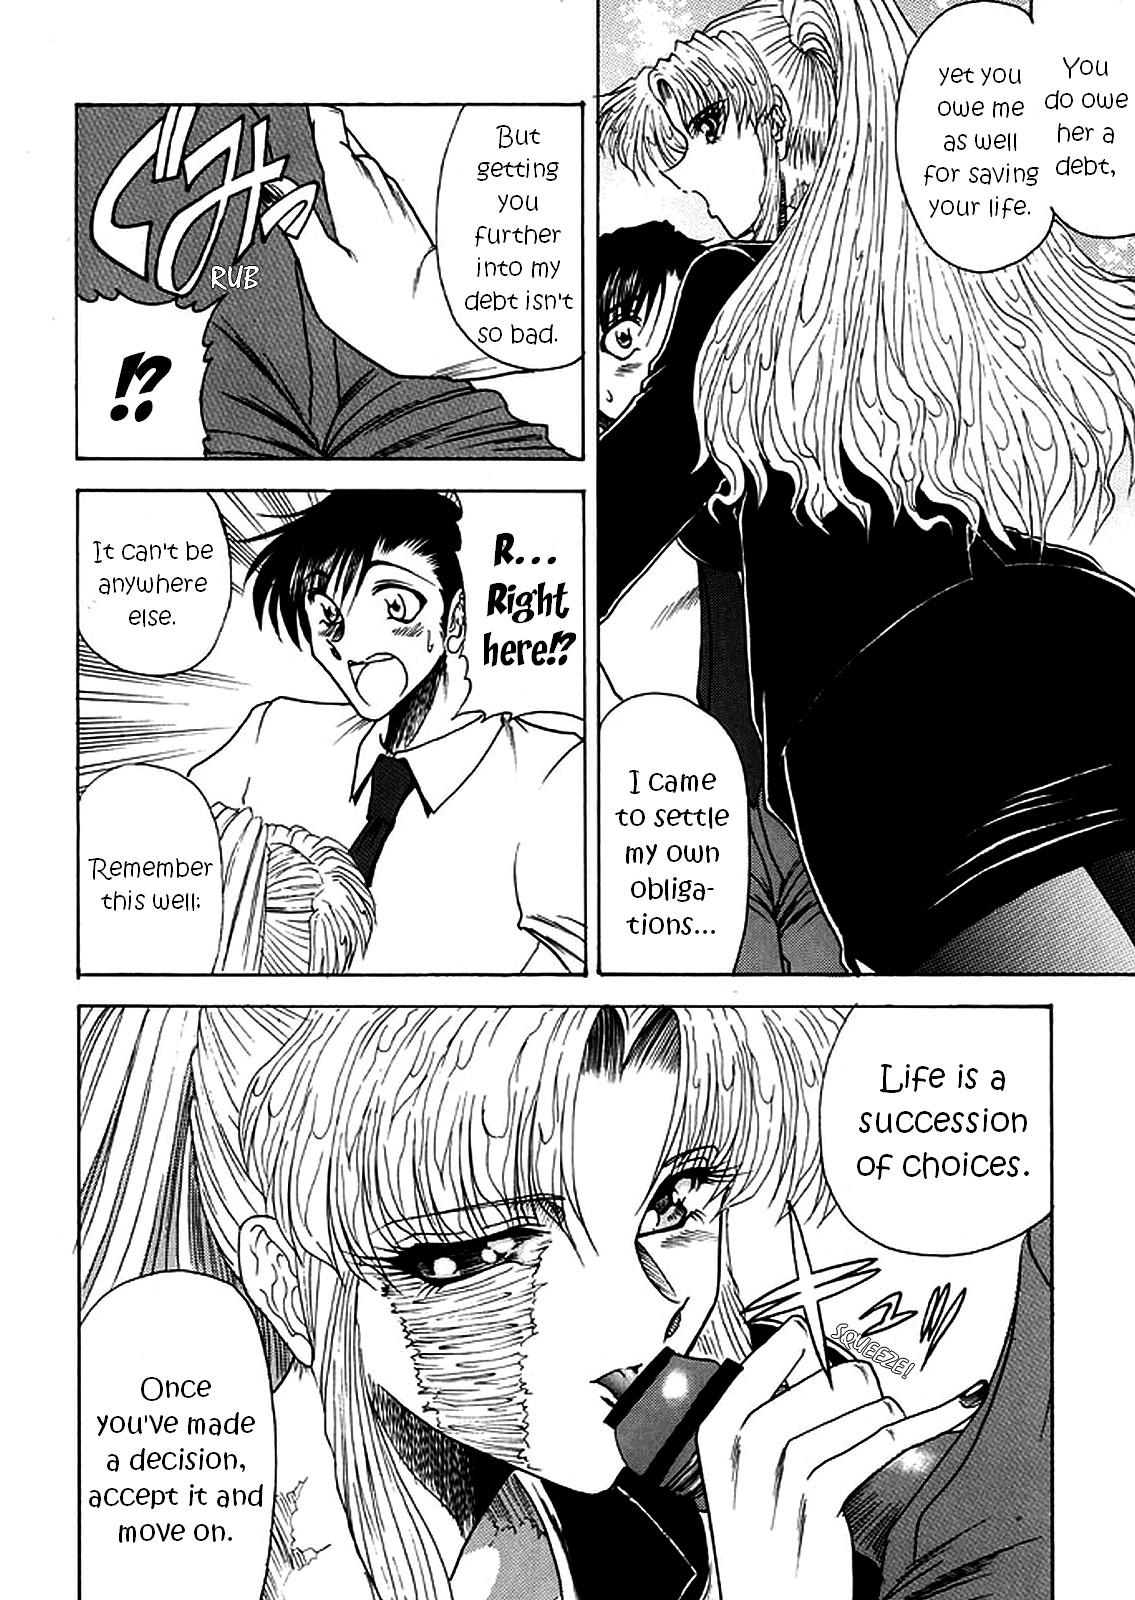 Piercings ZONE 40 A shot of the requiem - Black lagoon Hunks - Page 12